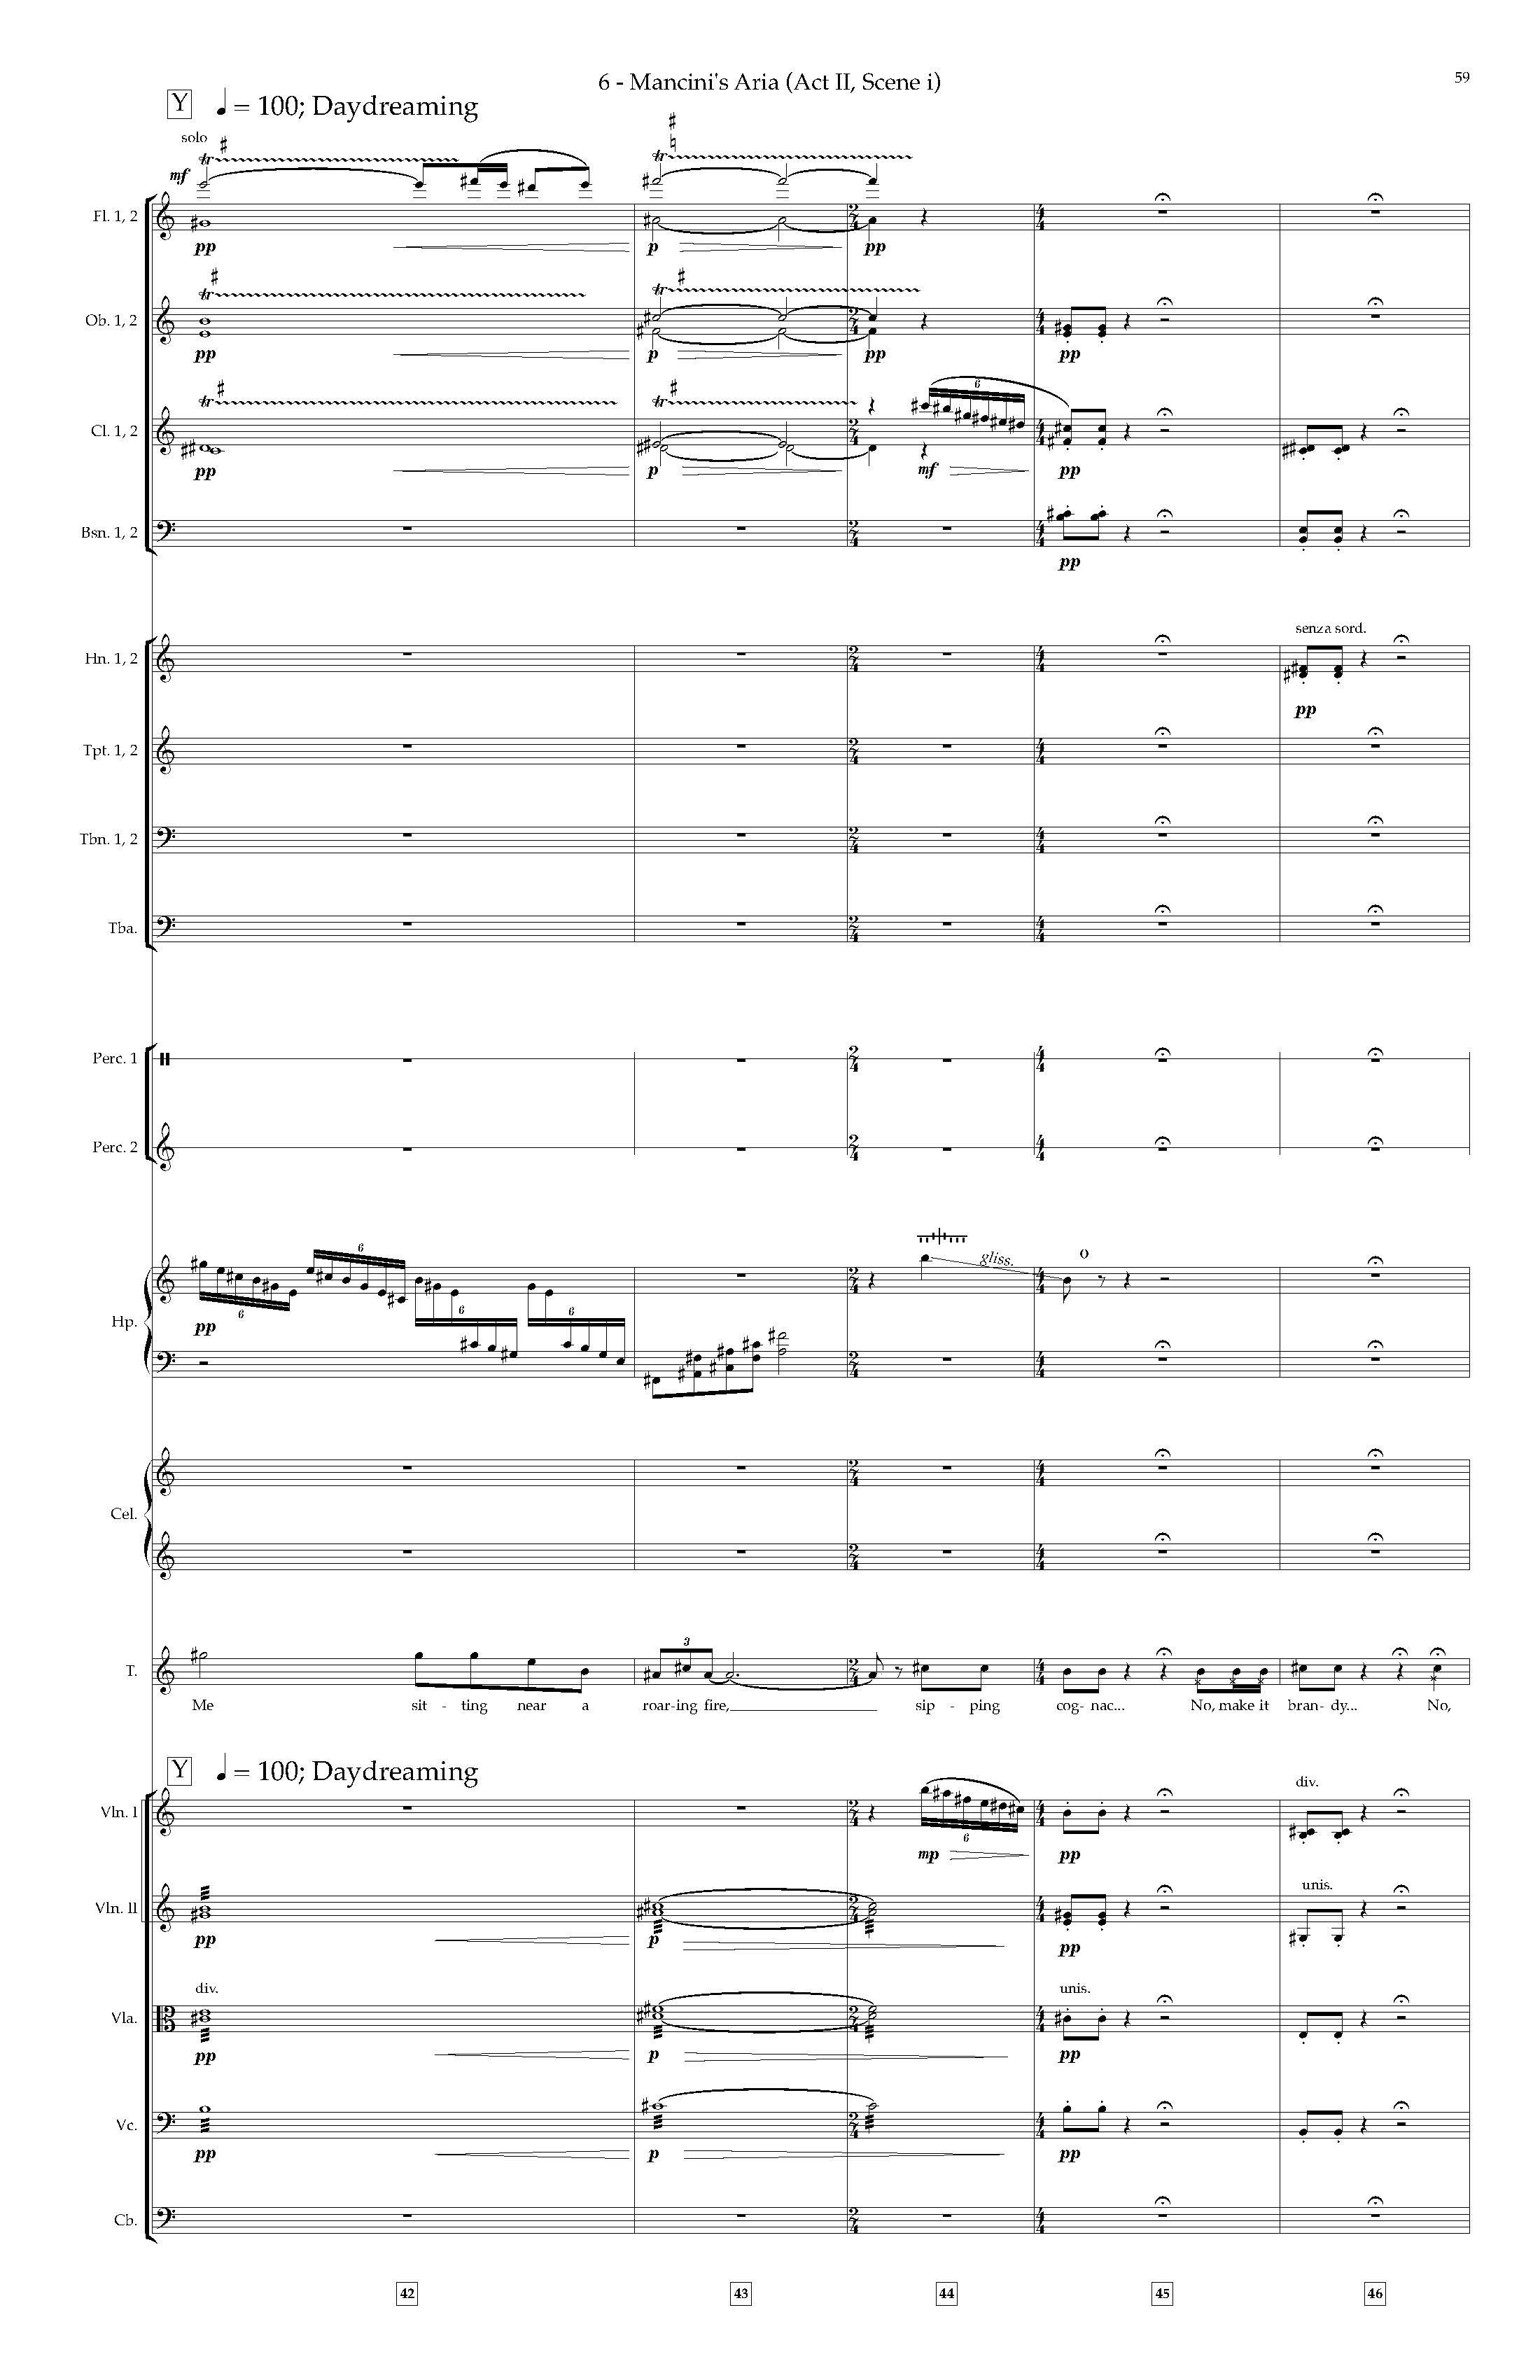 Arias and Interludes from HWGS - Complete Score_Page_65.jpg